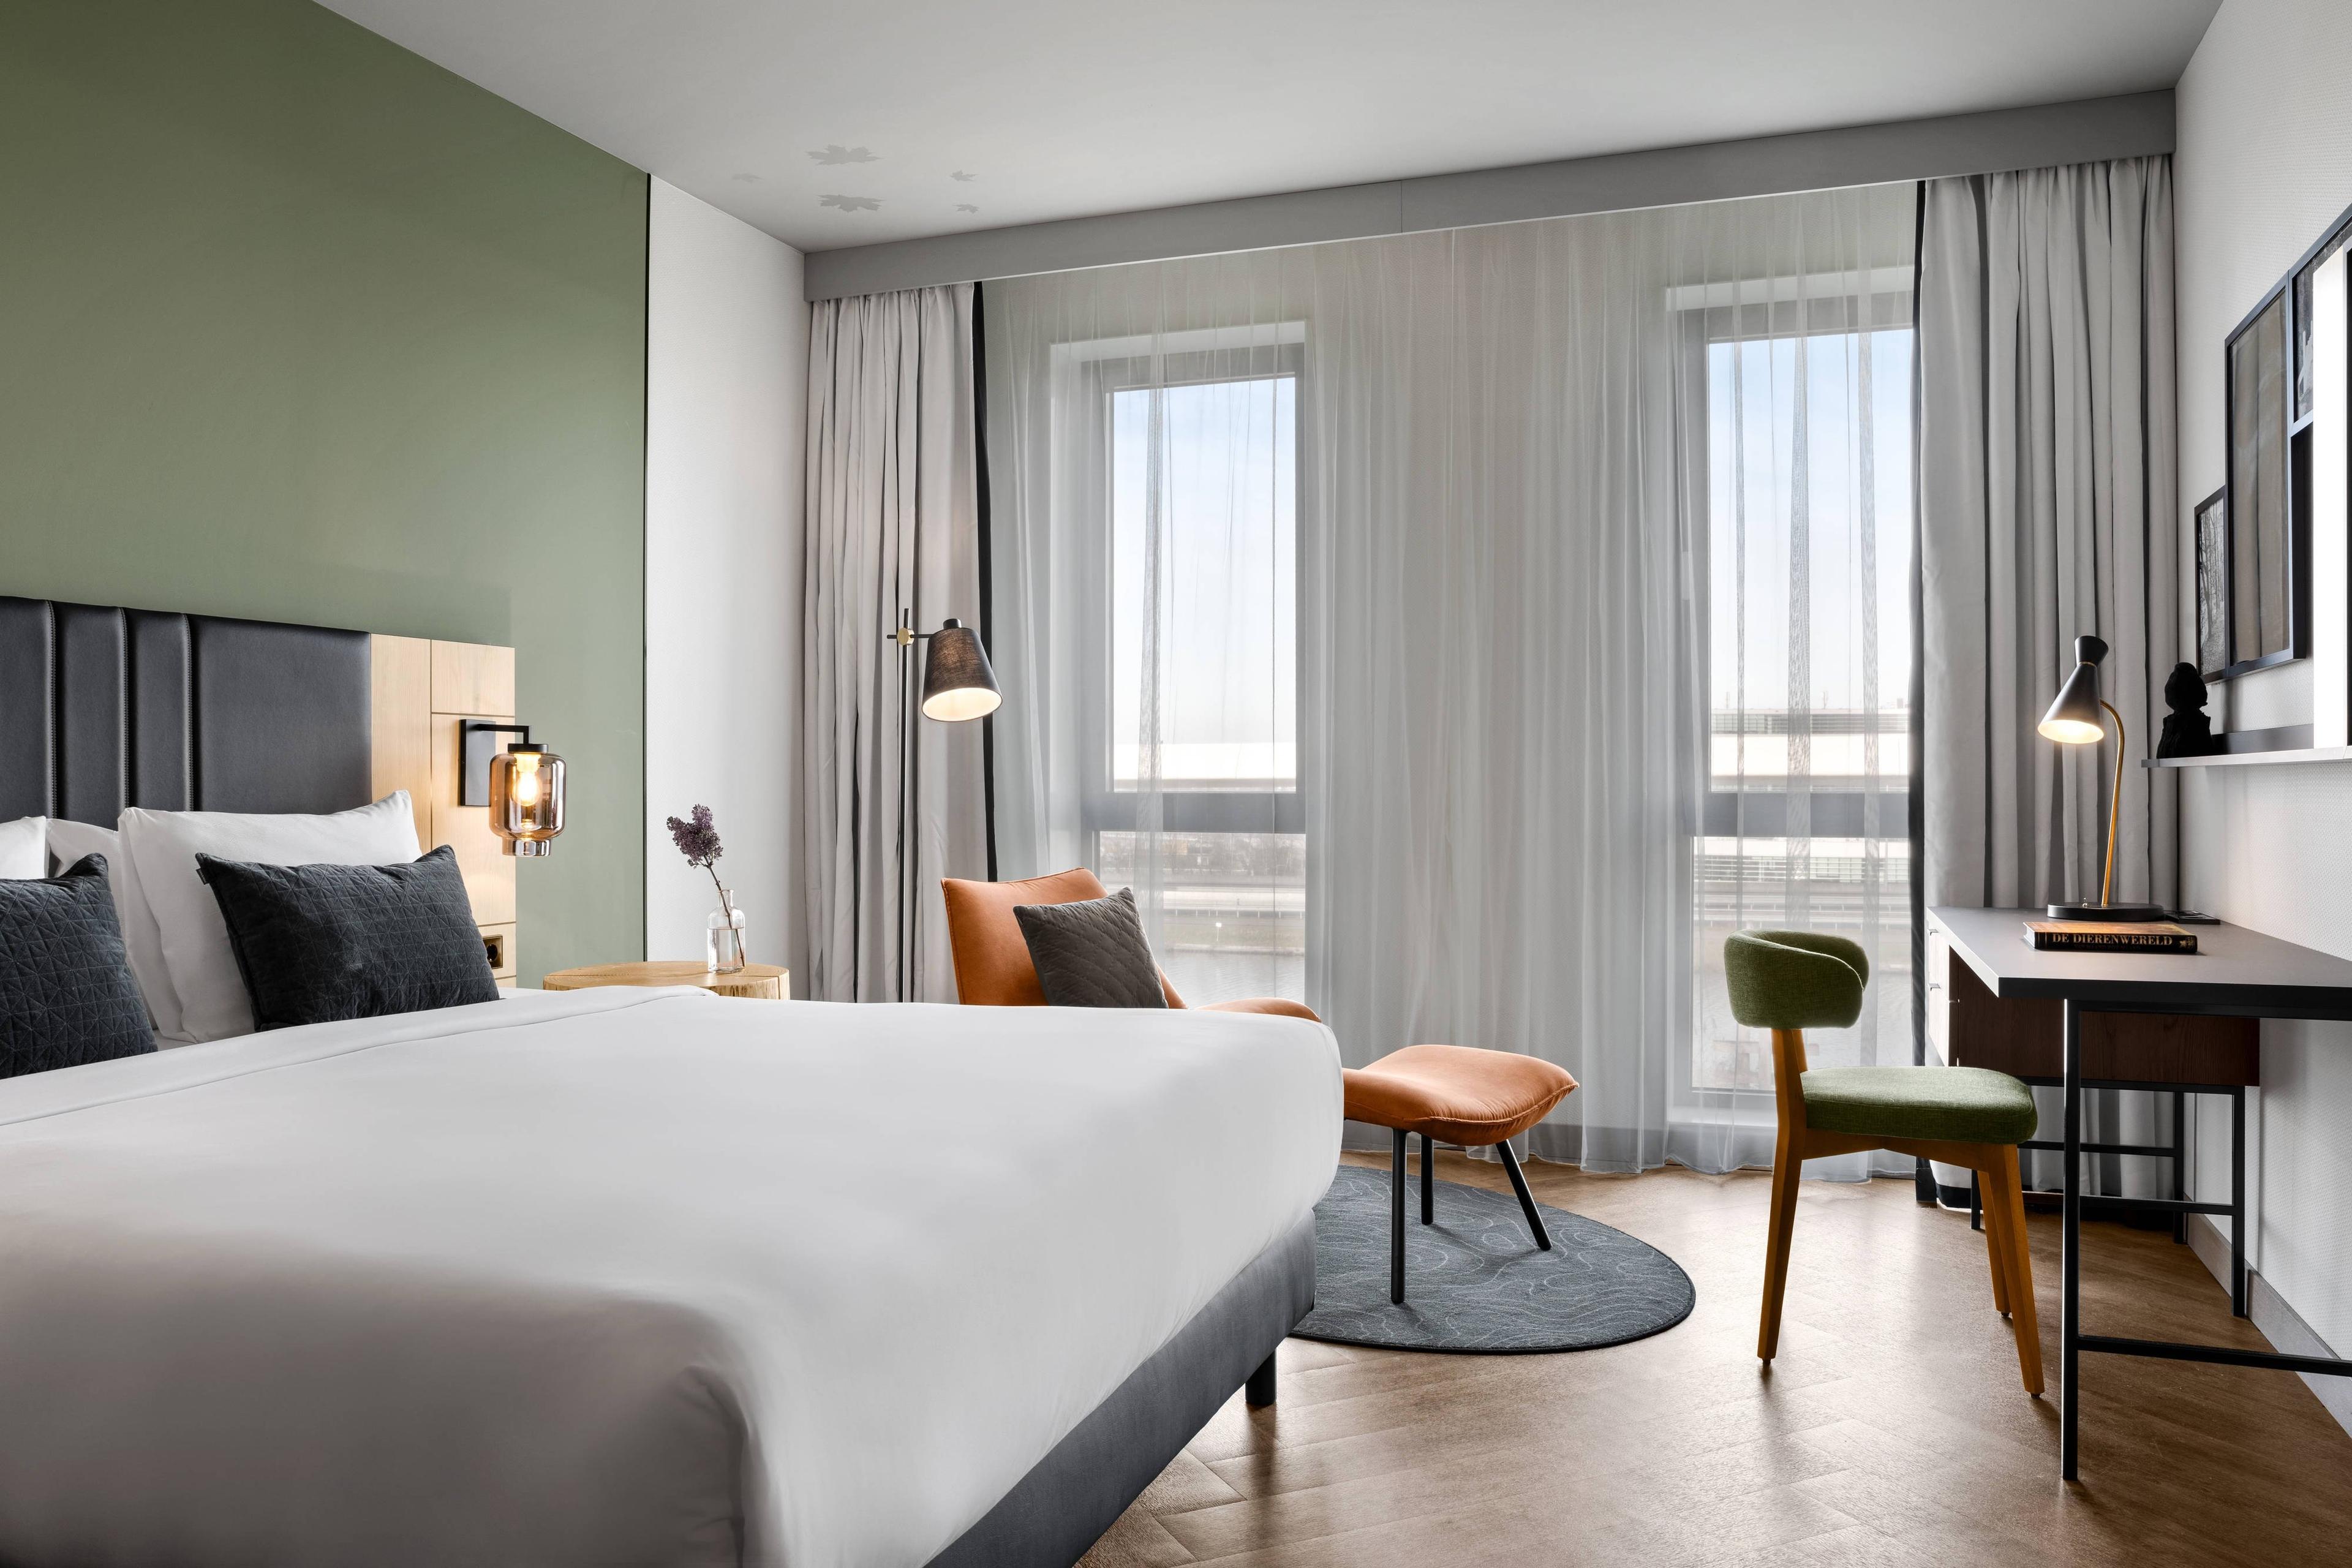 Our Superior King Guest Rooms welcome you to Aalsmeer with a modern design, flat screen TV, and complimentary Nespresso coffee.